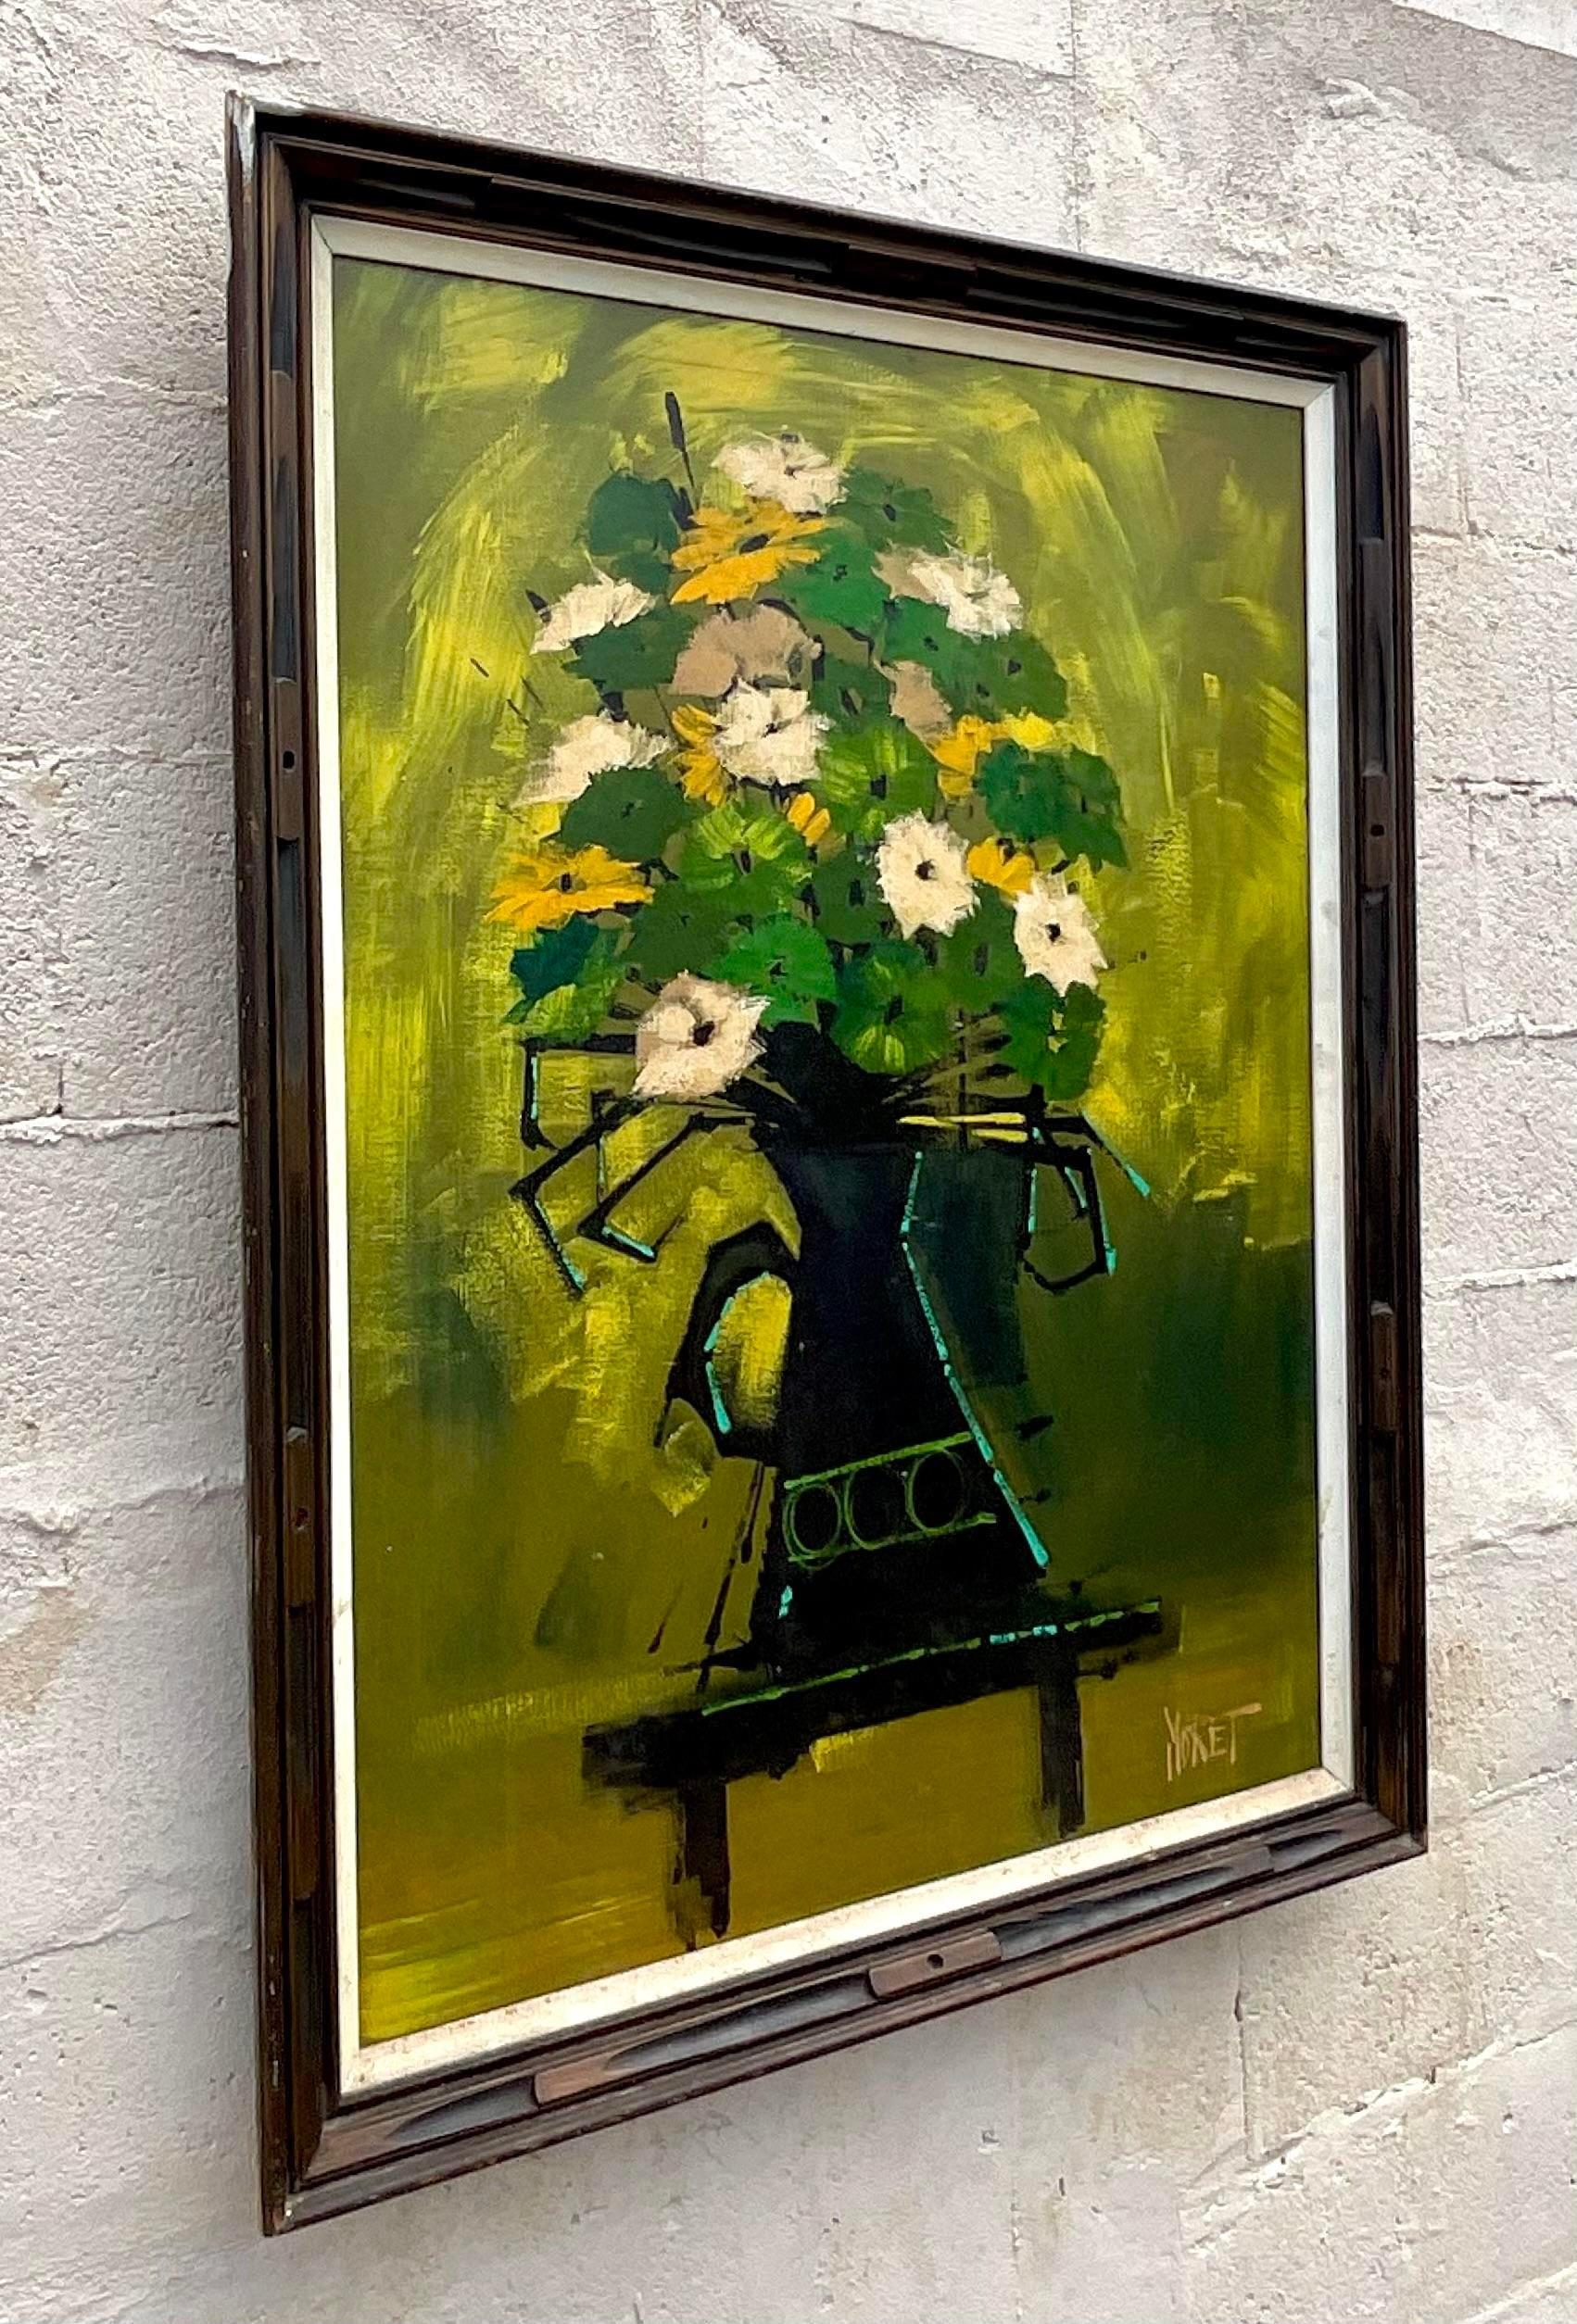 A fabulous vintage Original oil painting on canvas. A brilliant floral composition in deep shades of green. Signed by the artist. Acquired from a Palm Beach estate.